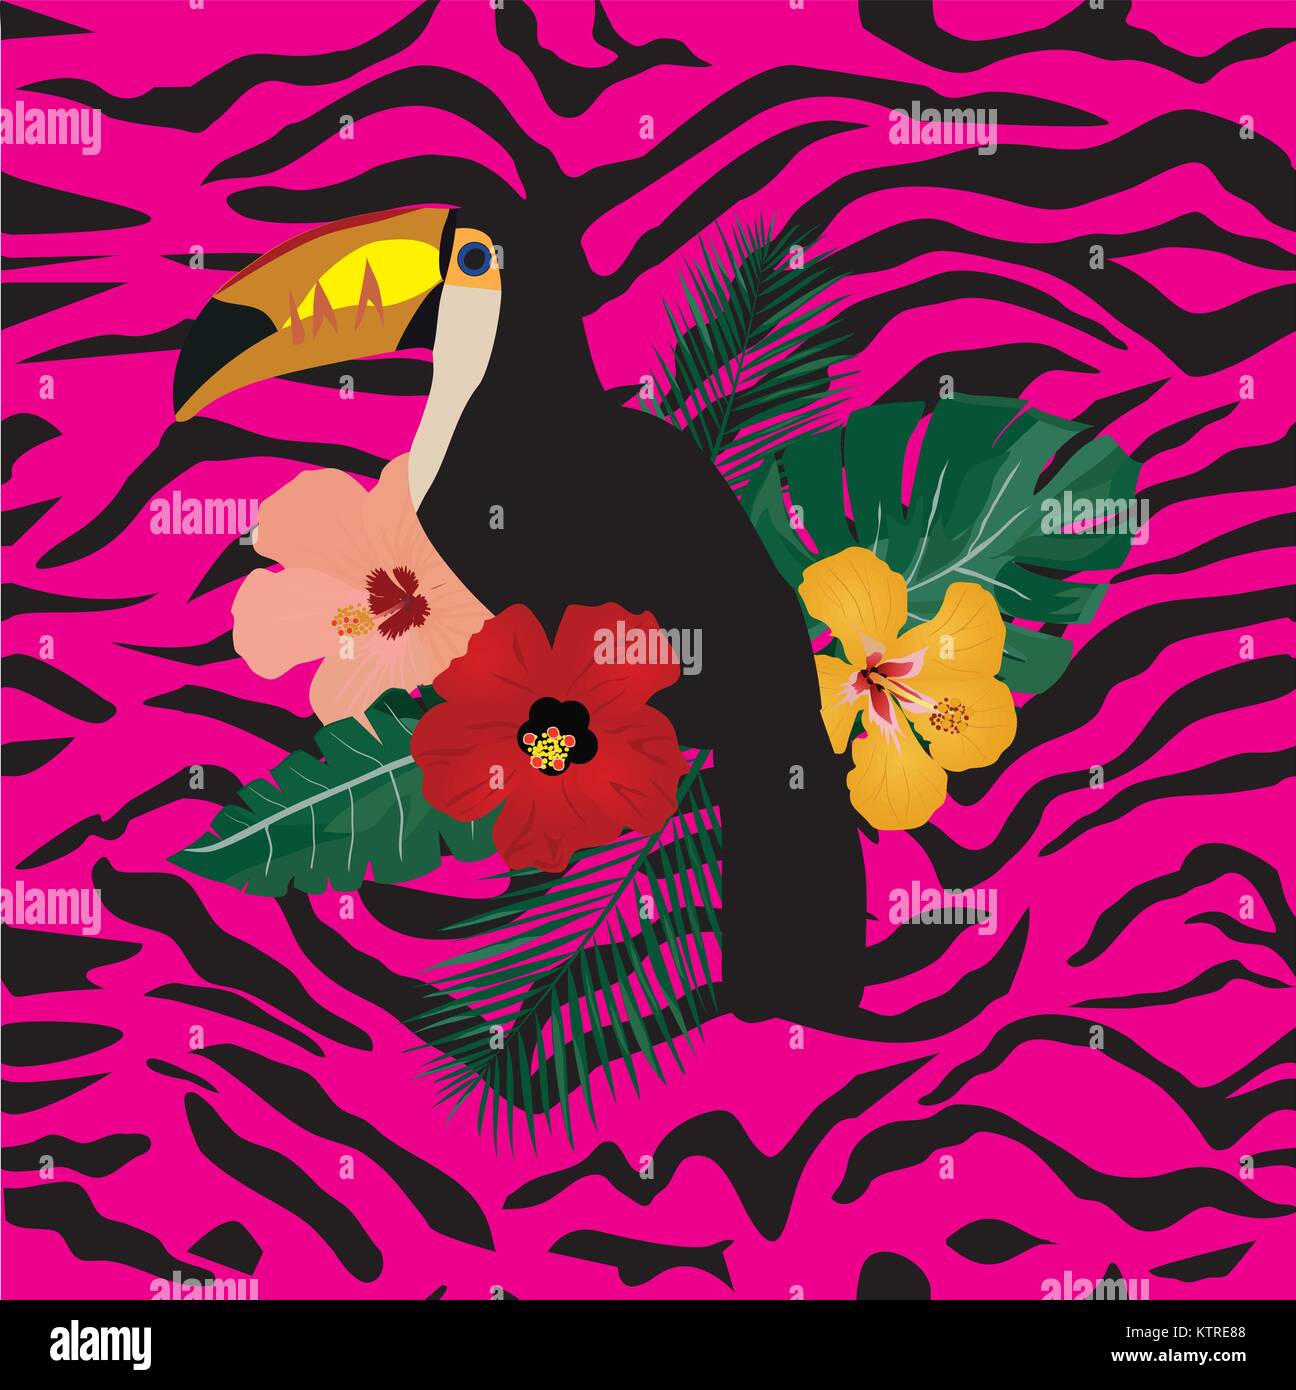 vector illustration of a toucan bird, tropical flowers on pink zebra pattern. Stock Vector